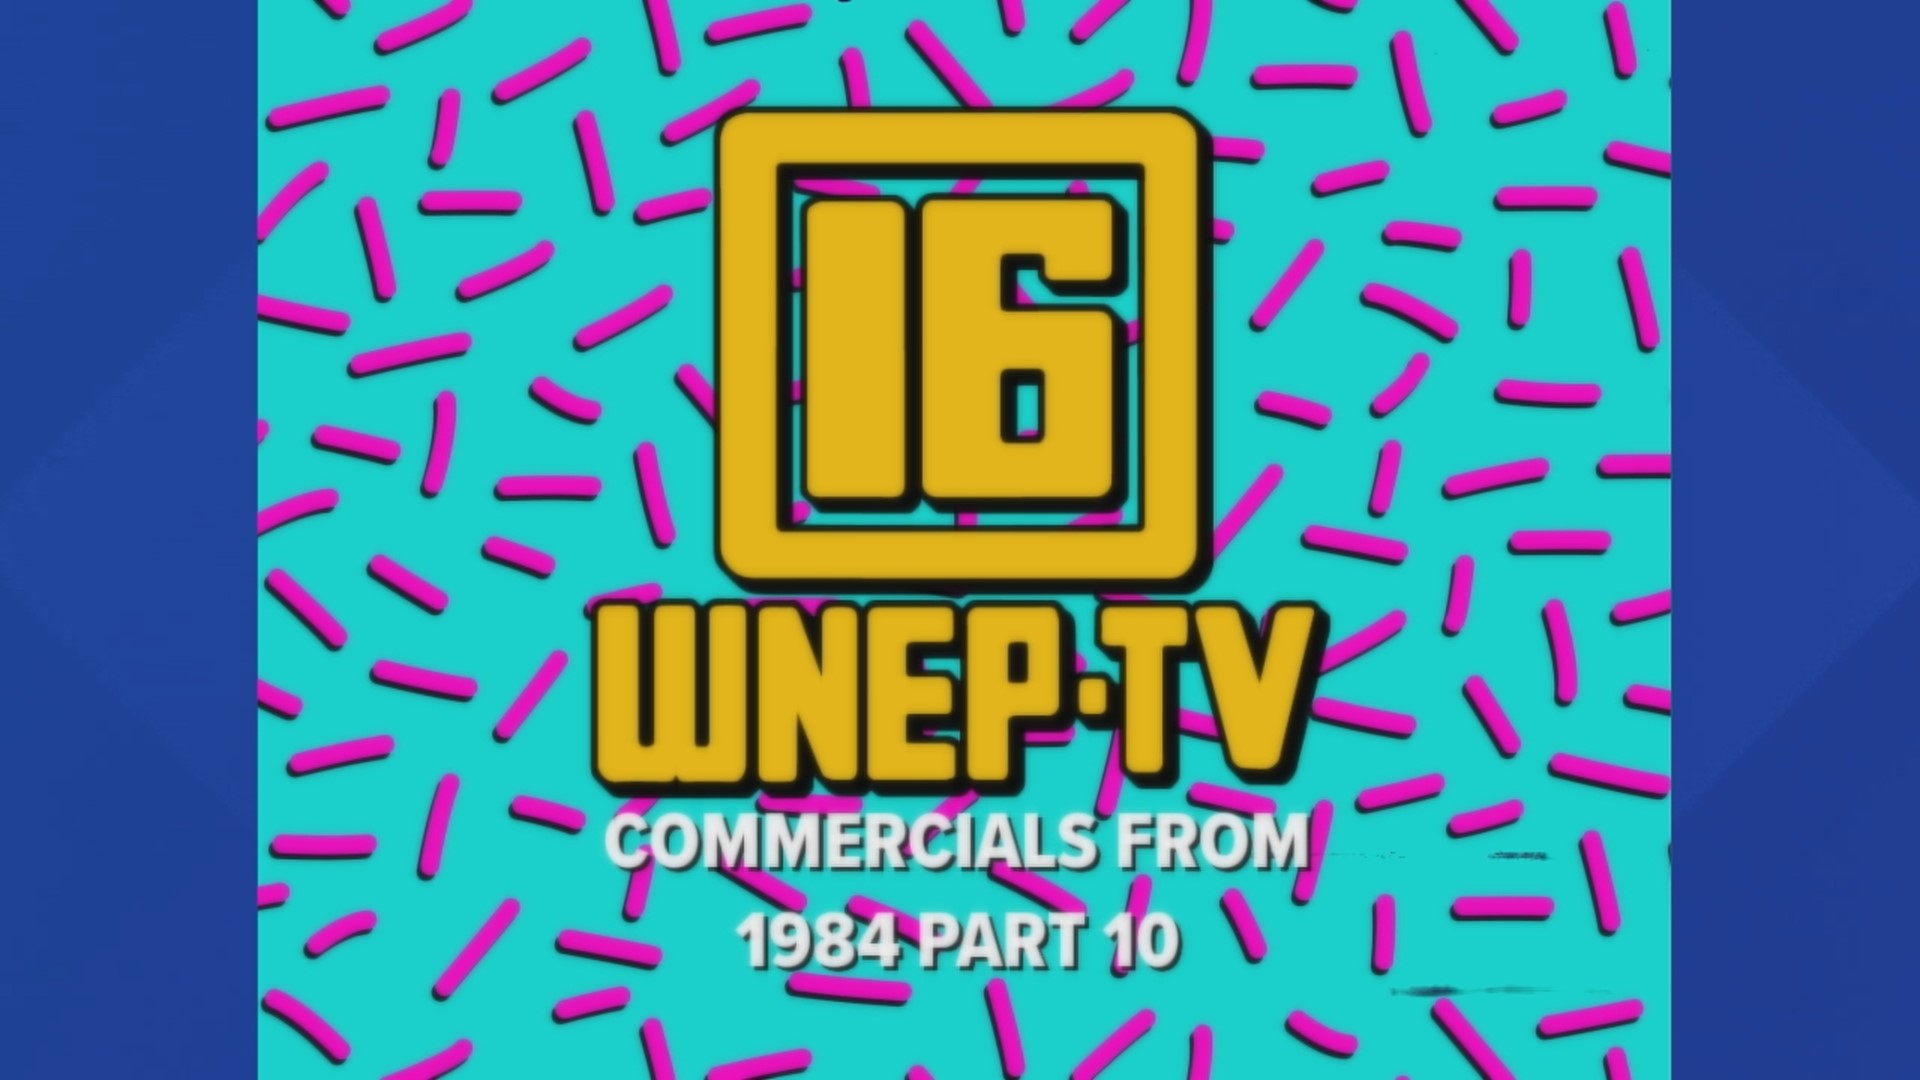 Here are some of the commercials that were on WNEP in 1984.